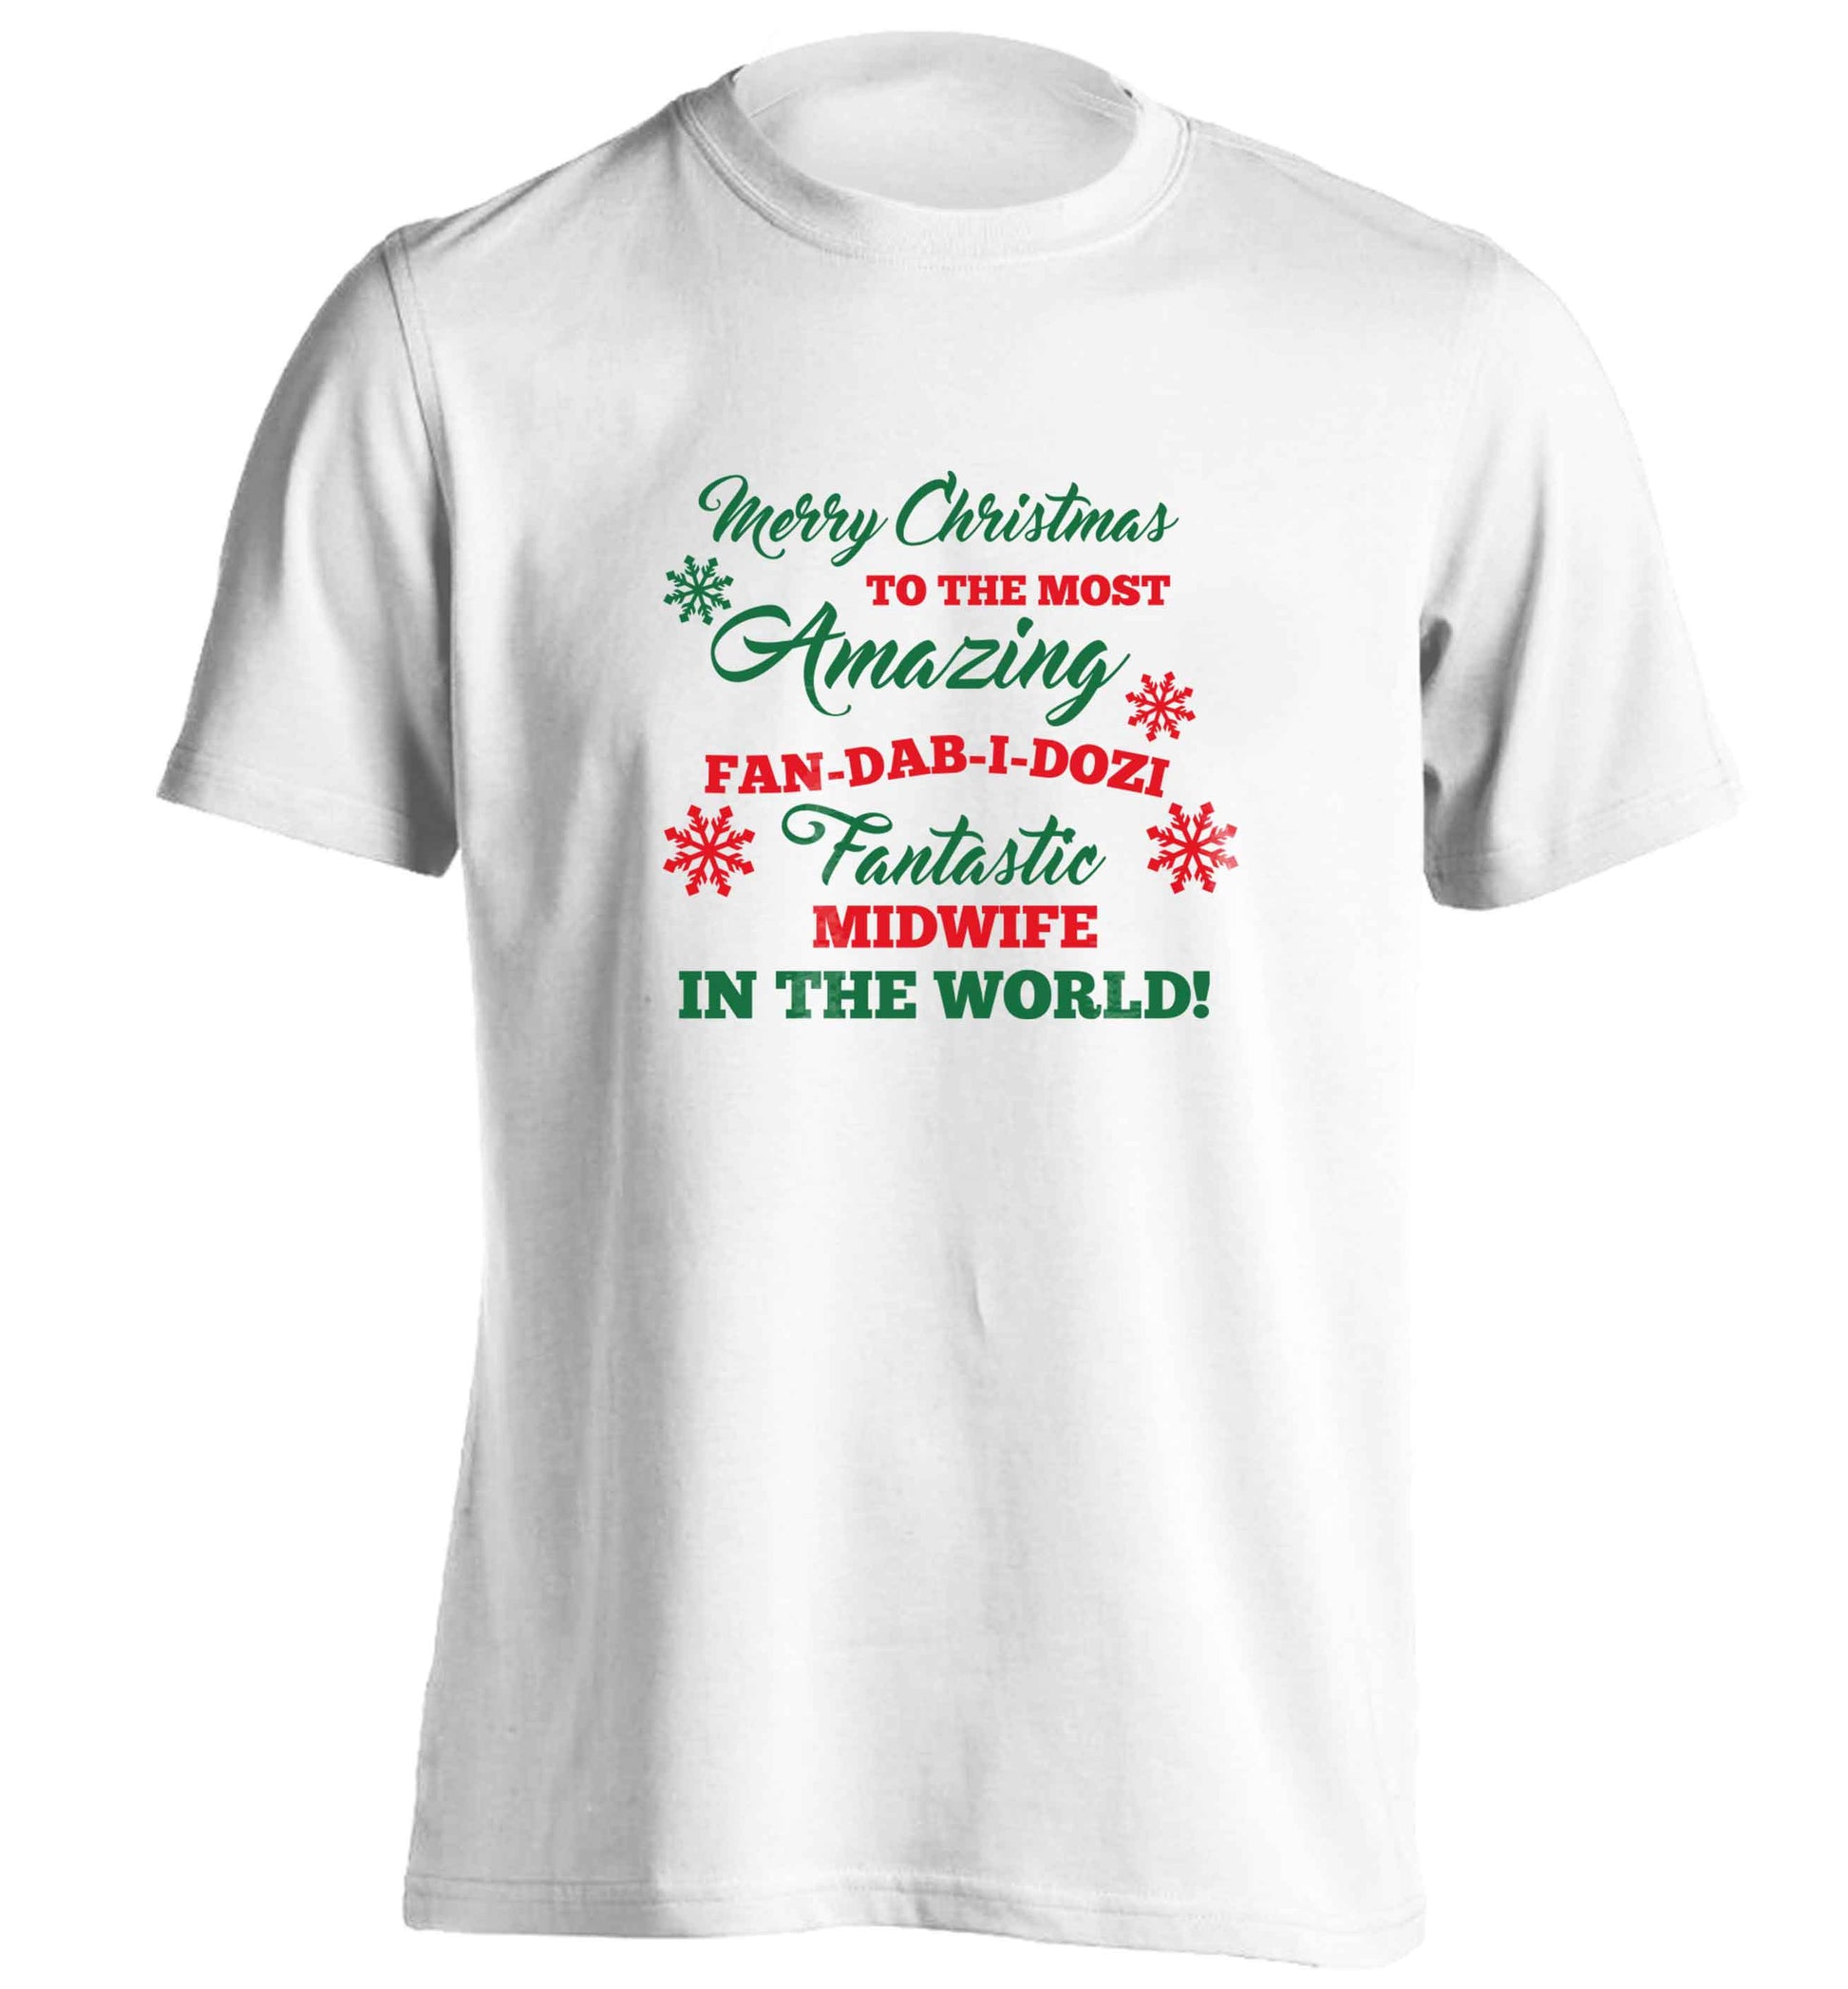 Merry Christmas to the most amazing midwife in the world! adults unisex white Tshirt 2XL